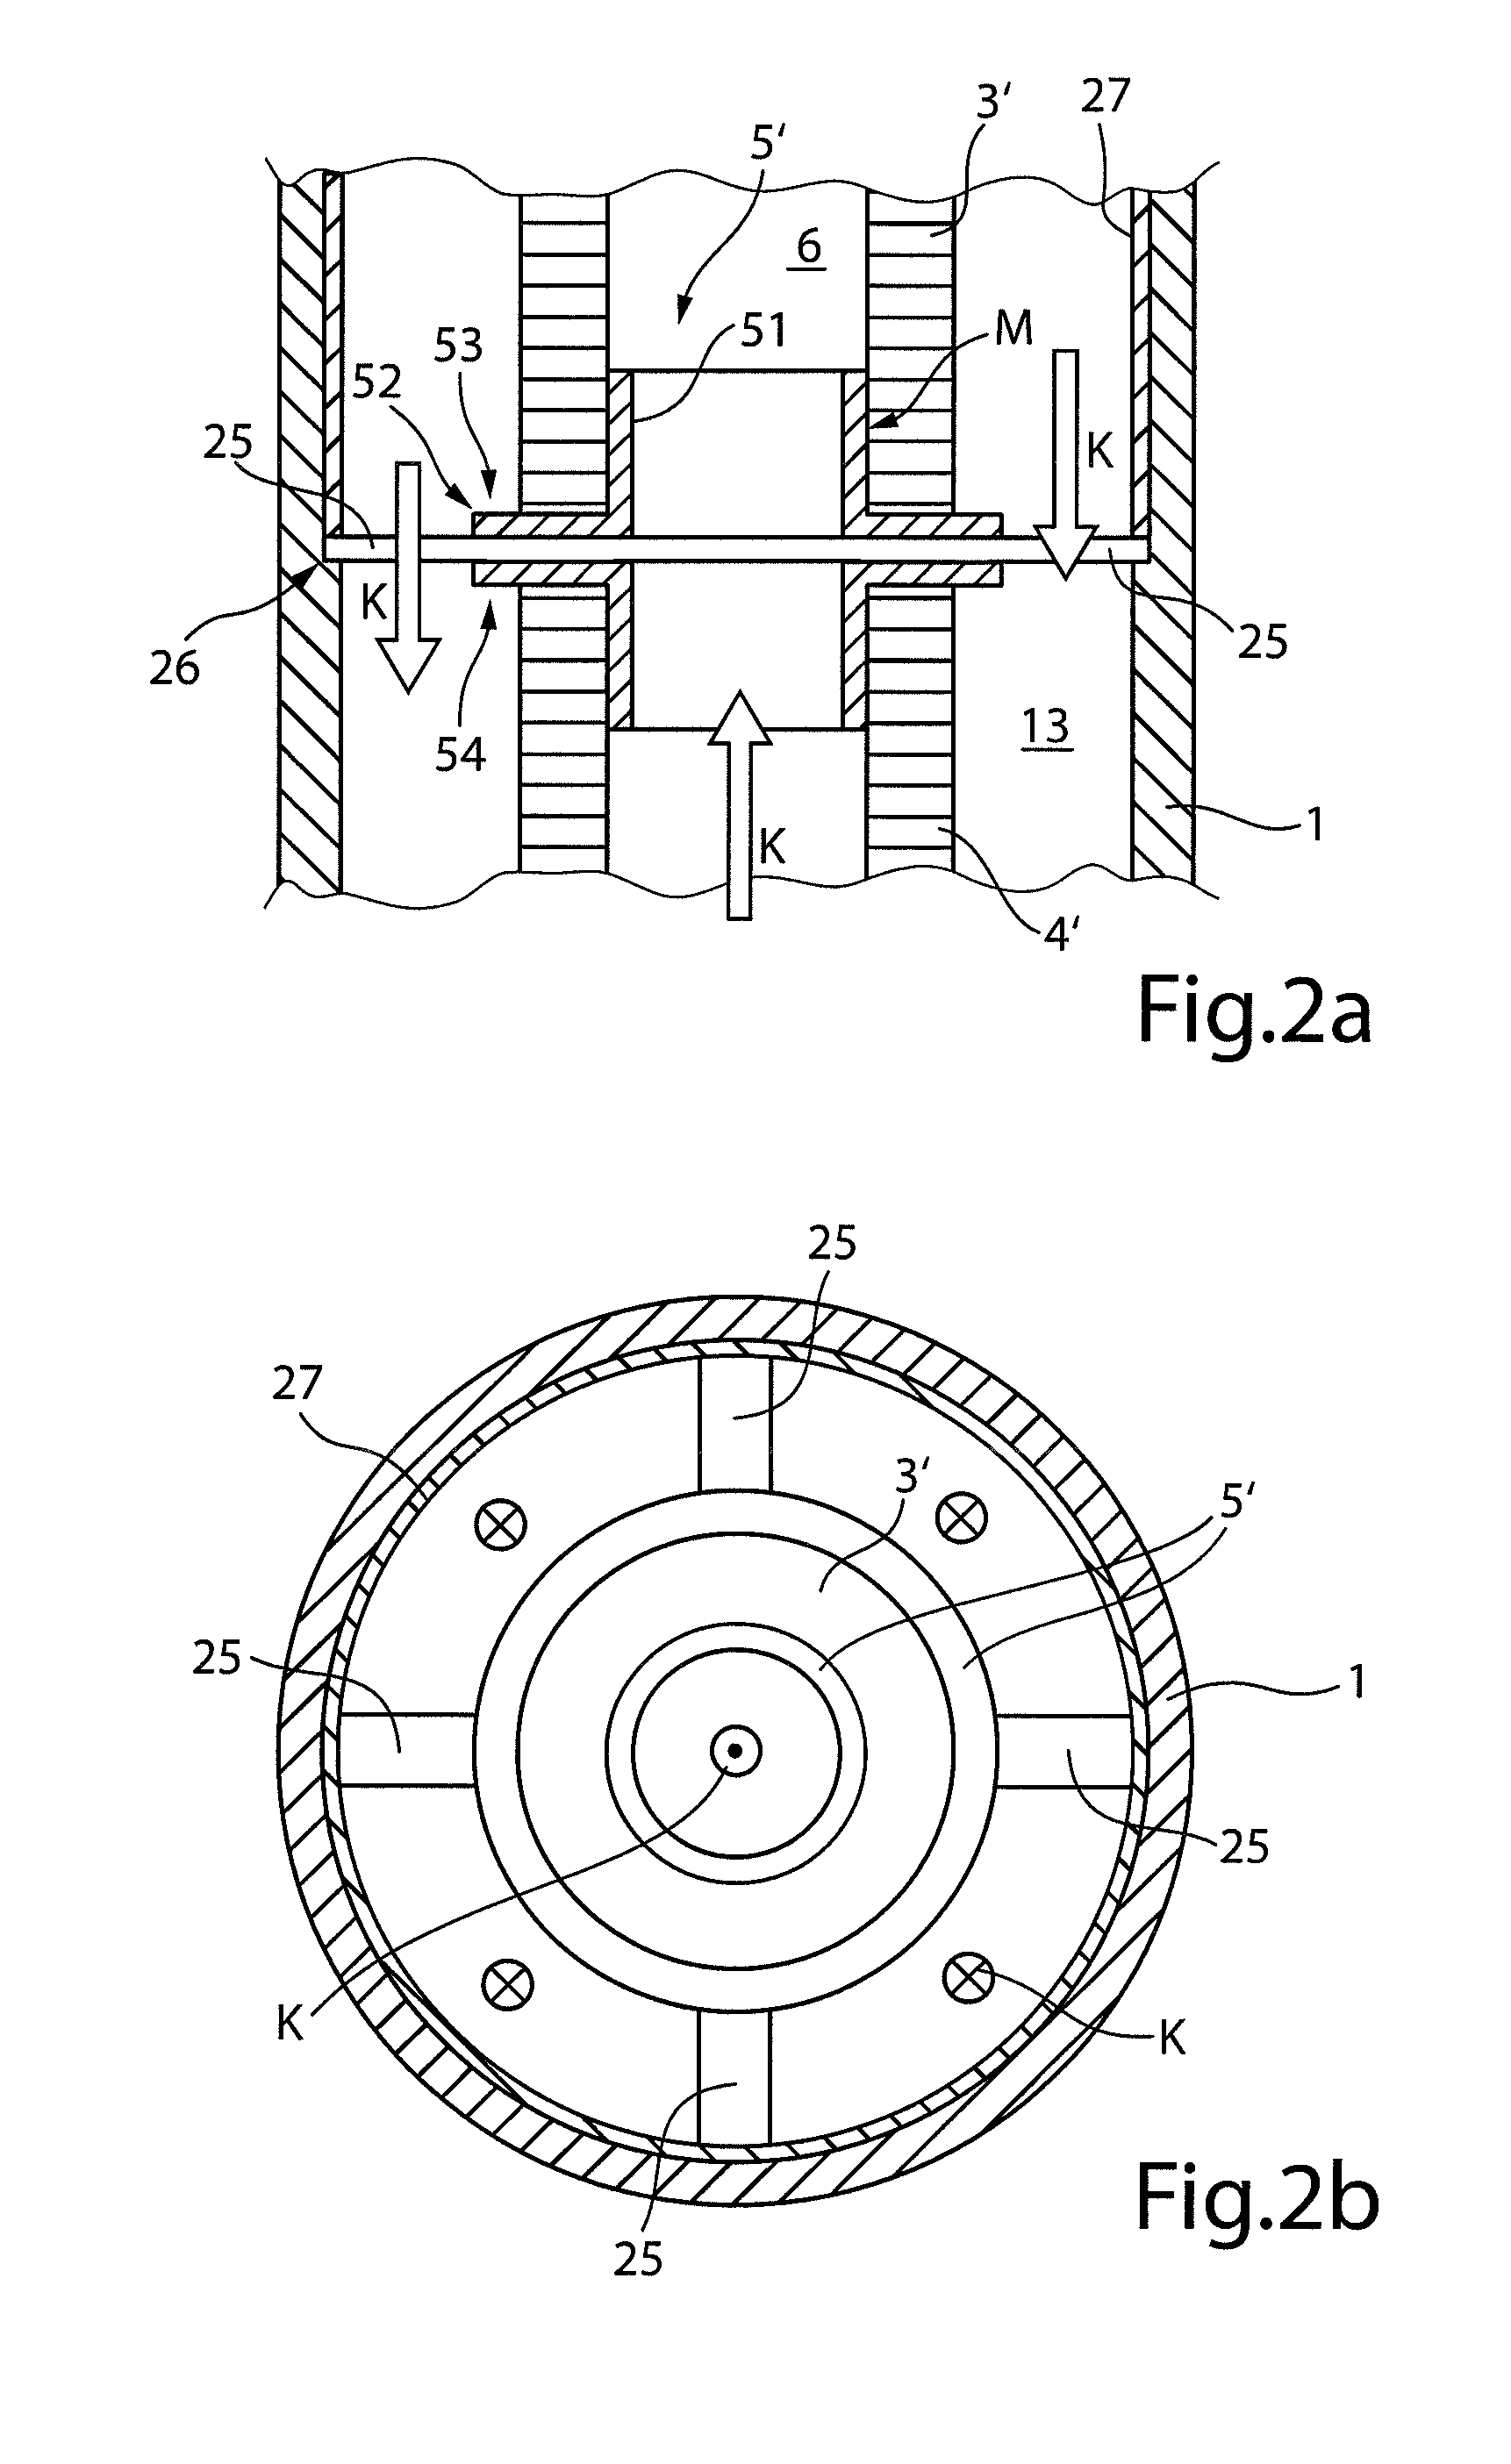 Actuating drive and method for cooling a solid body actuator housed in an actuating drive with an actuating element